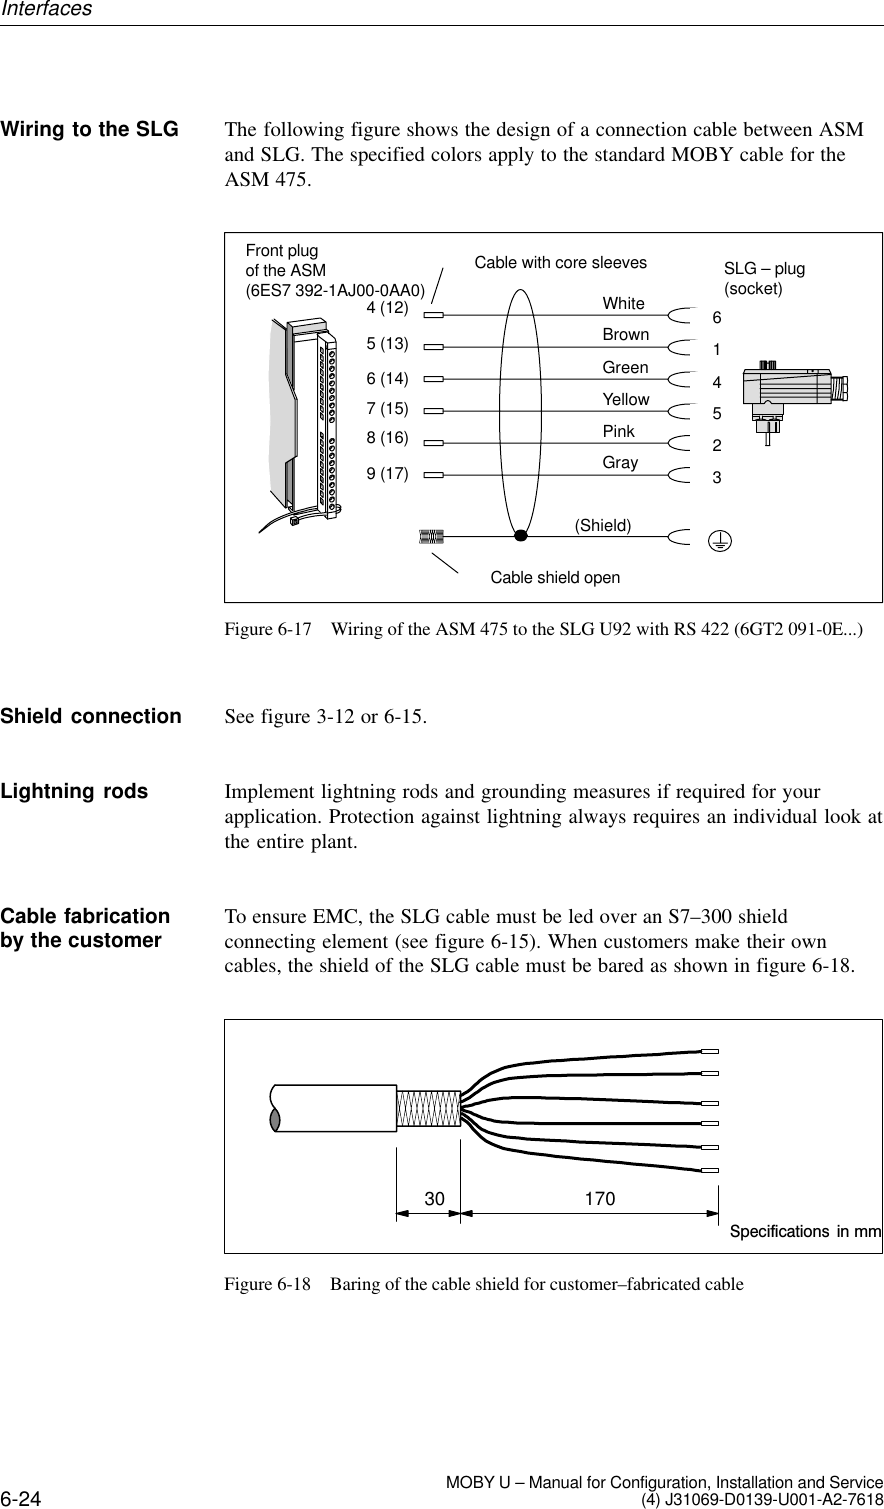 6-24 MOBY U – Manual for Configuration, Installation and Service(4) J31069-D0139-U001-A2-7618The following figure shows the design of a connection cable between ASMand SLG. The specified colors apply to the standard MOBY cable for theASM 475.SLG – plug(socket)Cable with core sleevesWhiteBrownGreenYellowPinkGray(Shield)6145234 (12)5 (13)6 (14)7 (15)8 (16)9 (17)Front plug of the ASM (6ES7 392-1AJ00-0AA0)Cable shield openFigure 6-17 Wiring of the ASM 475 to the SLG U92 with RS 422 (6GT2 091-0E...)See figure 3-12 or 6-15.Implement lightning rods and grounding measures if required for yourapplication. Protection against lightning always requires an individual look atthe entire plant.To ensure EMC, the SLG cable must be led over an S7–300 shieldconnecting element (see figure 6-15). When customers make their owncables, the shield of the SLG cable must be bared as shown in figure 6-18.Specifications  in mm30 170Figure 6-18 Baring of the cable shield for customer–fabricated cableWiring to the SLGShield connectionLightning rodsCable fabricationby the customerInterfaces